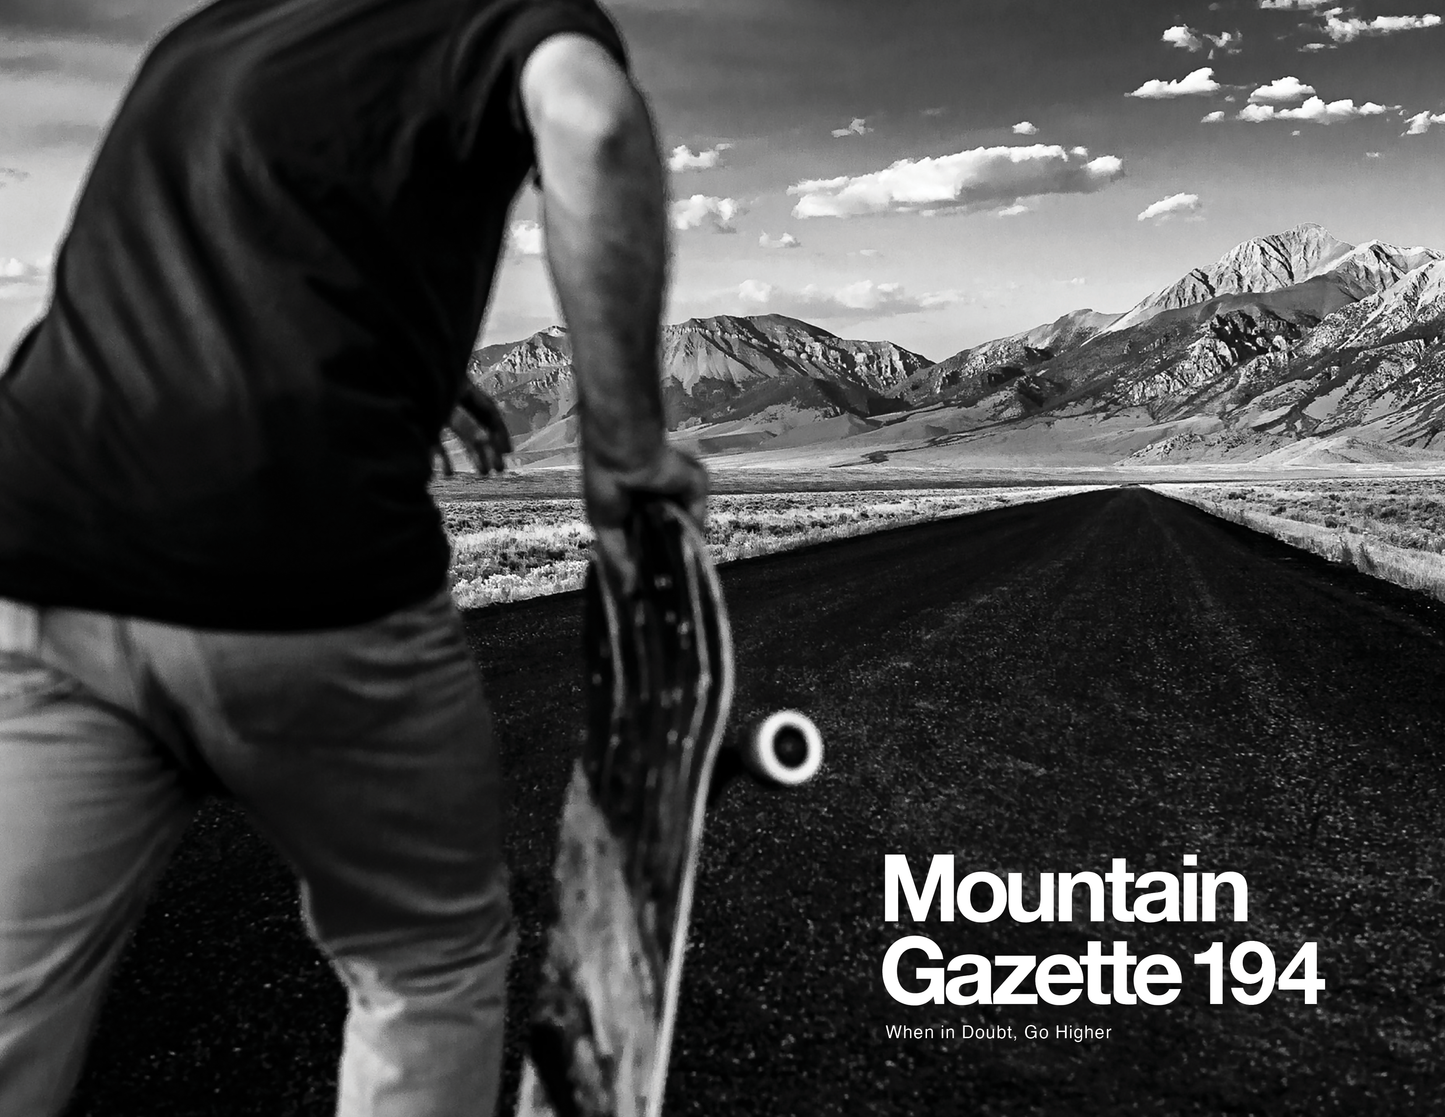 Vintage cover of Mountain Gazette issue 194 showing a skateboarder on a road